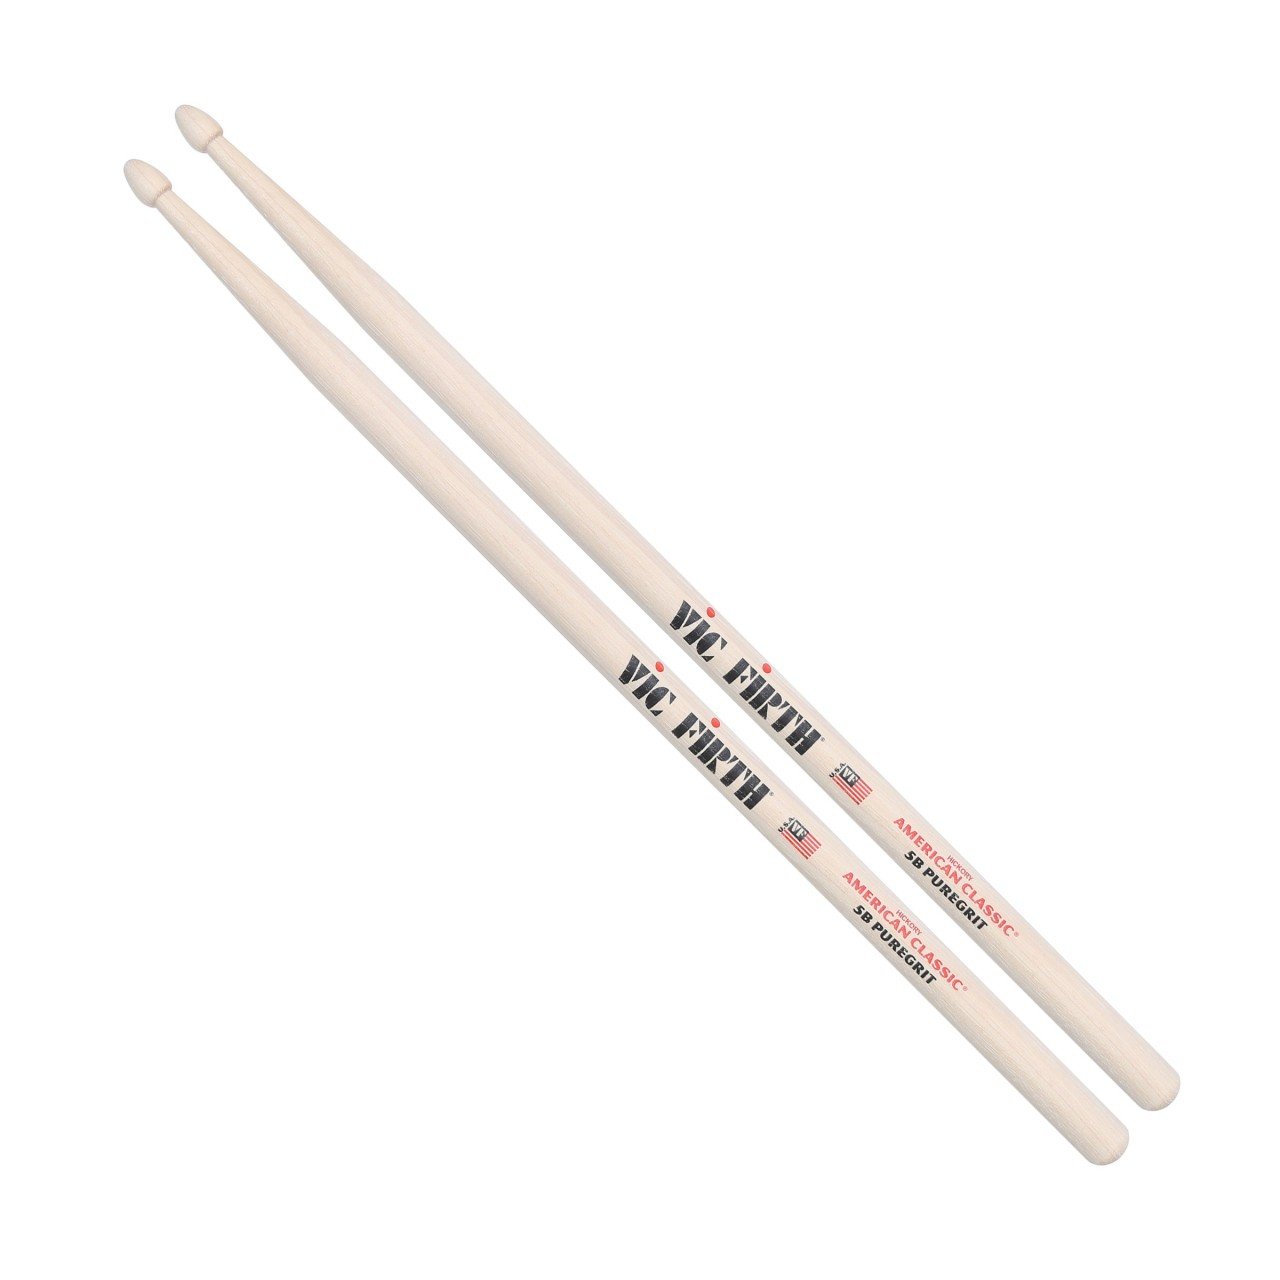 VIC FIRTH BAGET (ÇİFT) 5B PURE GRIT DS TİP, HICKORY,